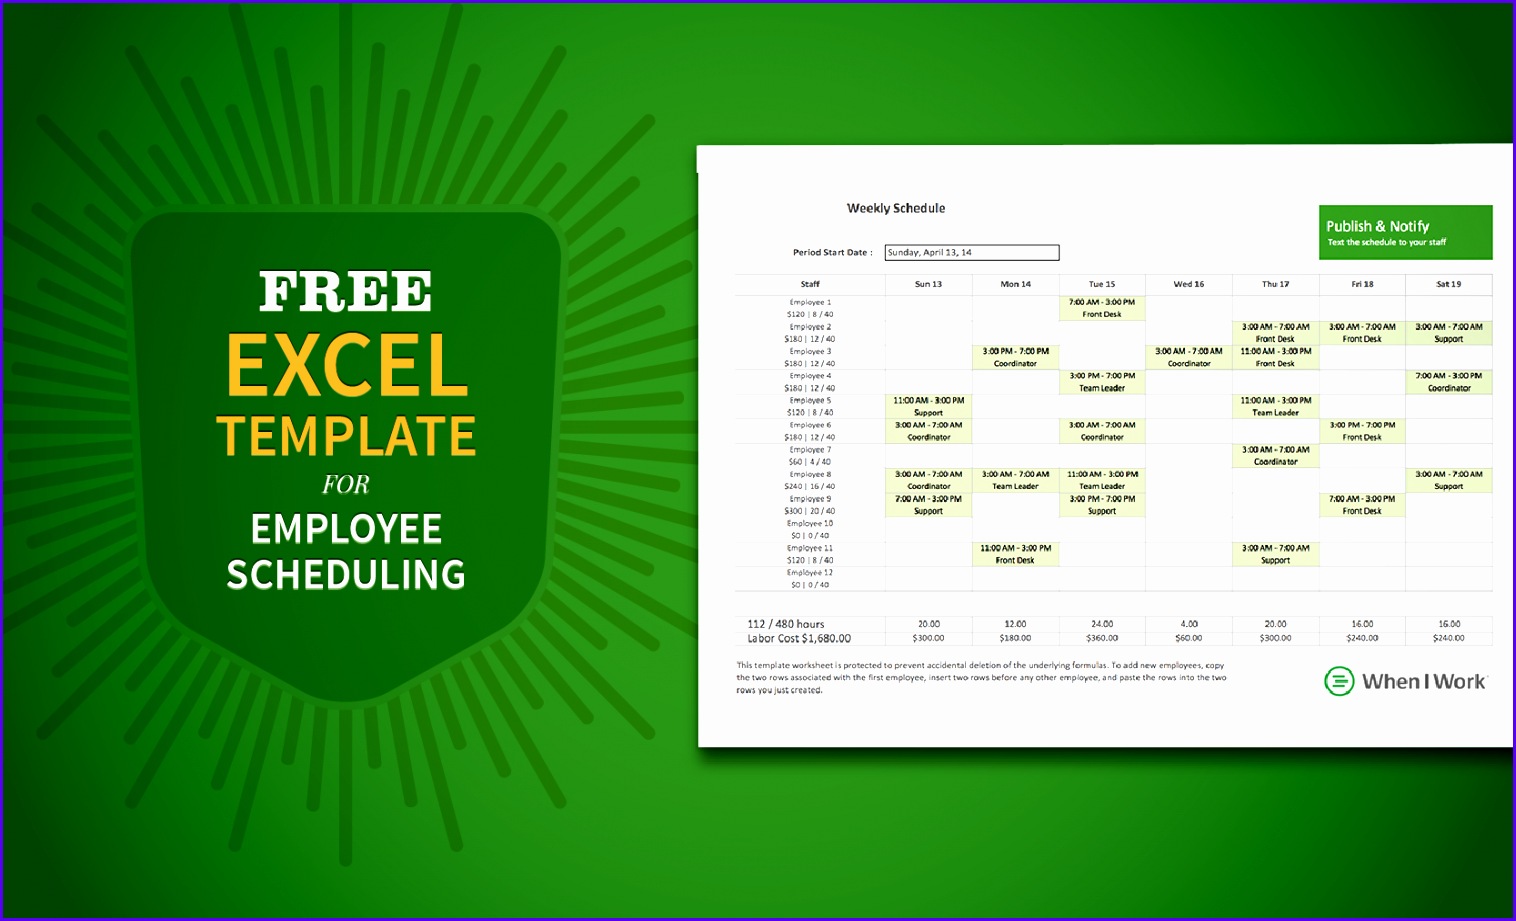 Free Excel Template for Employee Scheduling When I Work